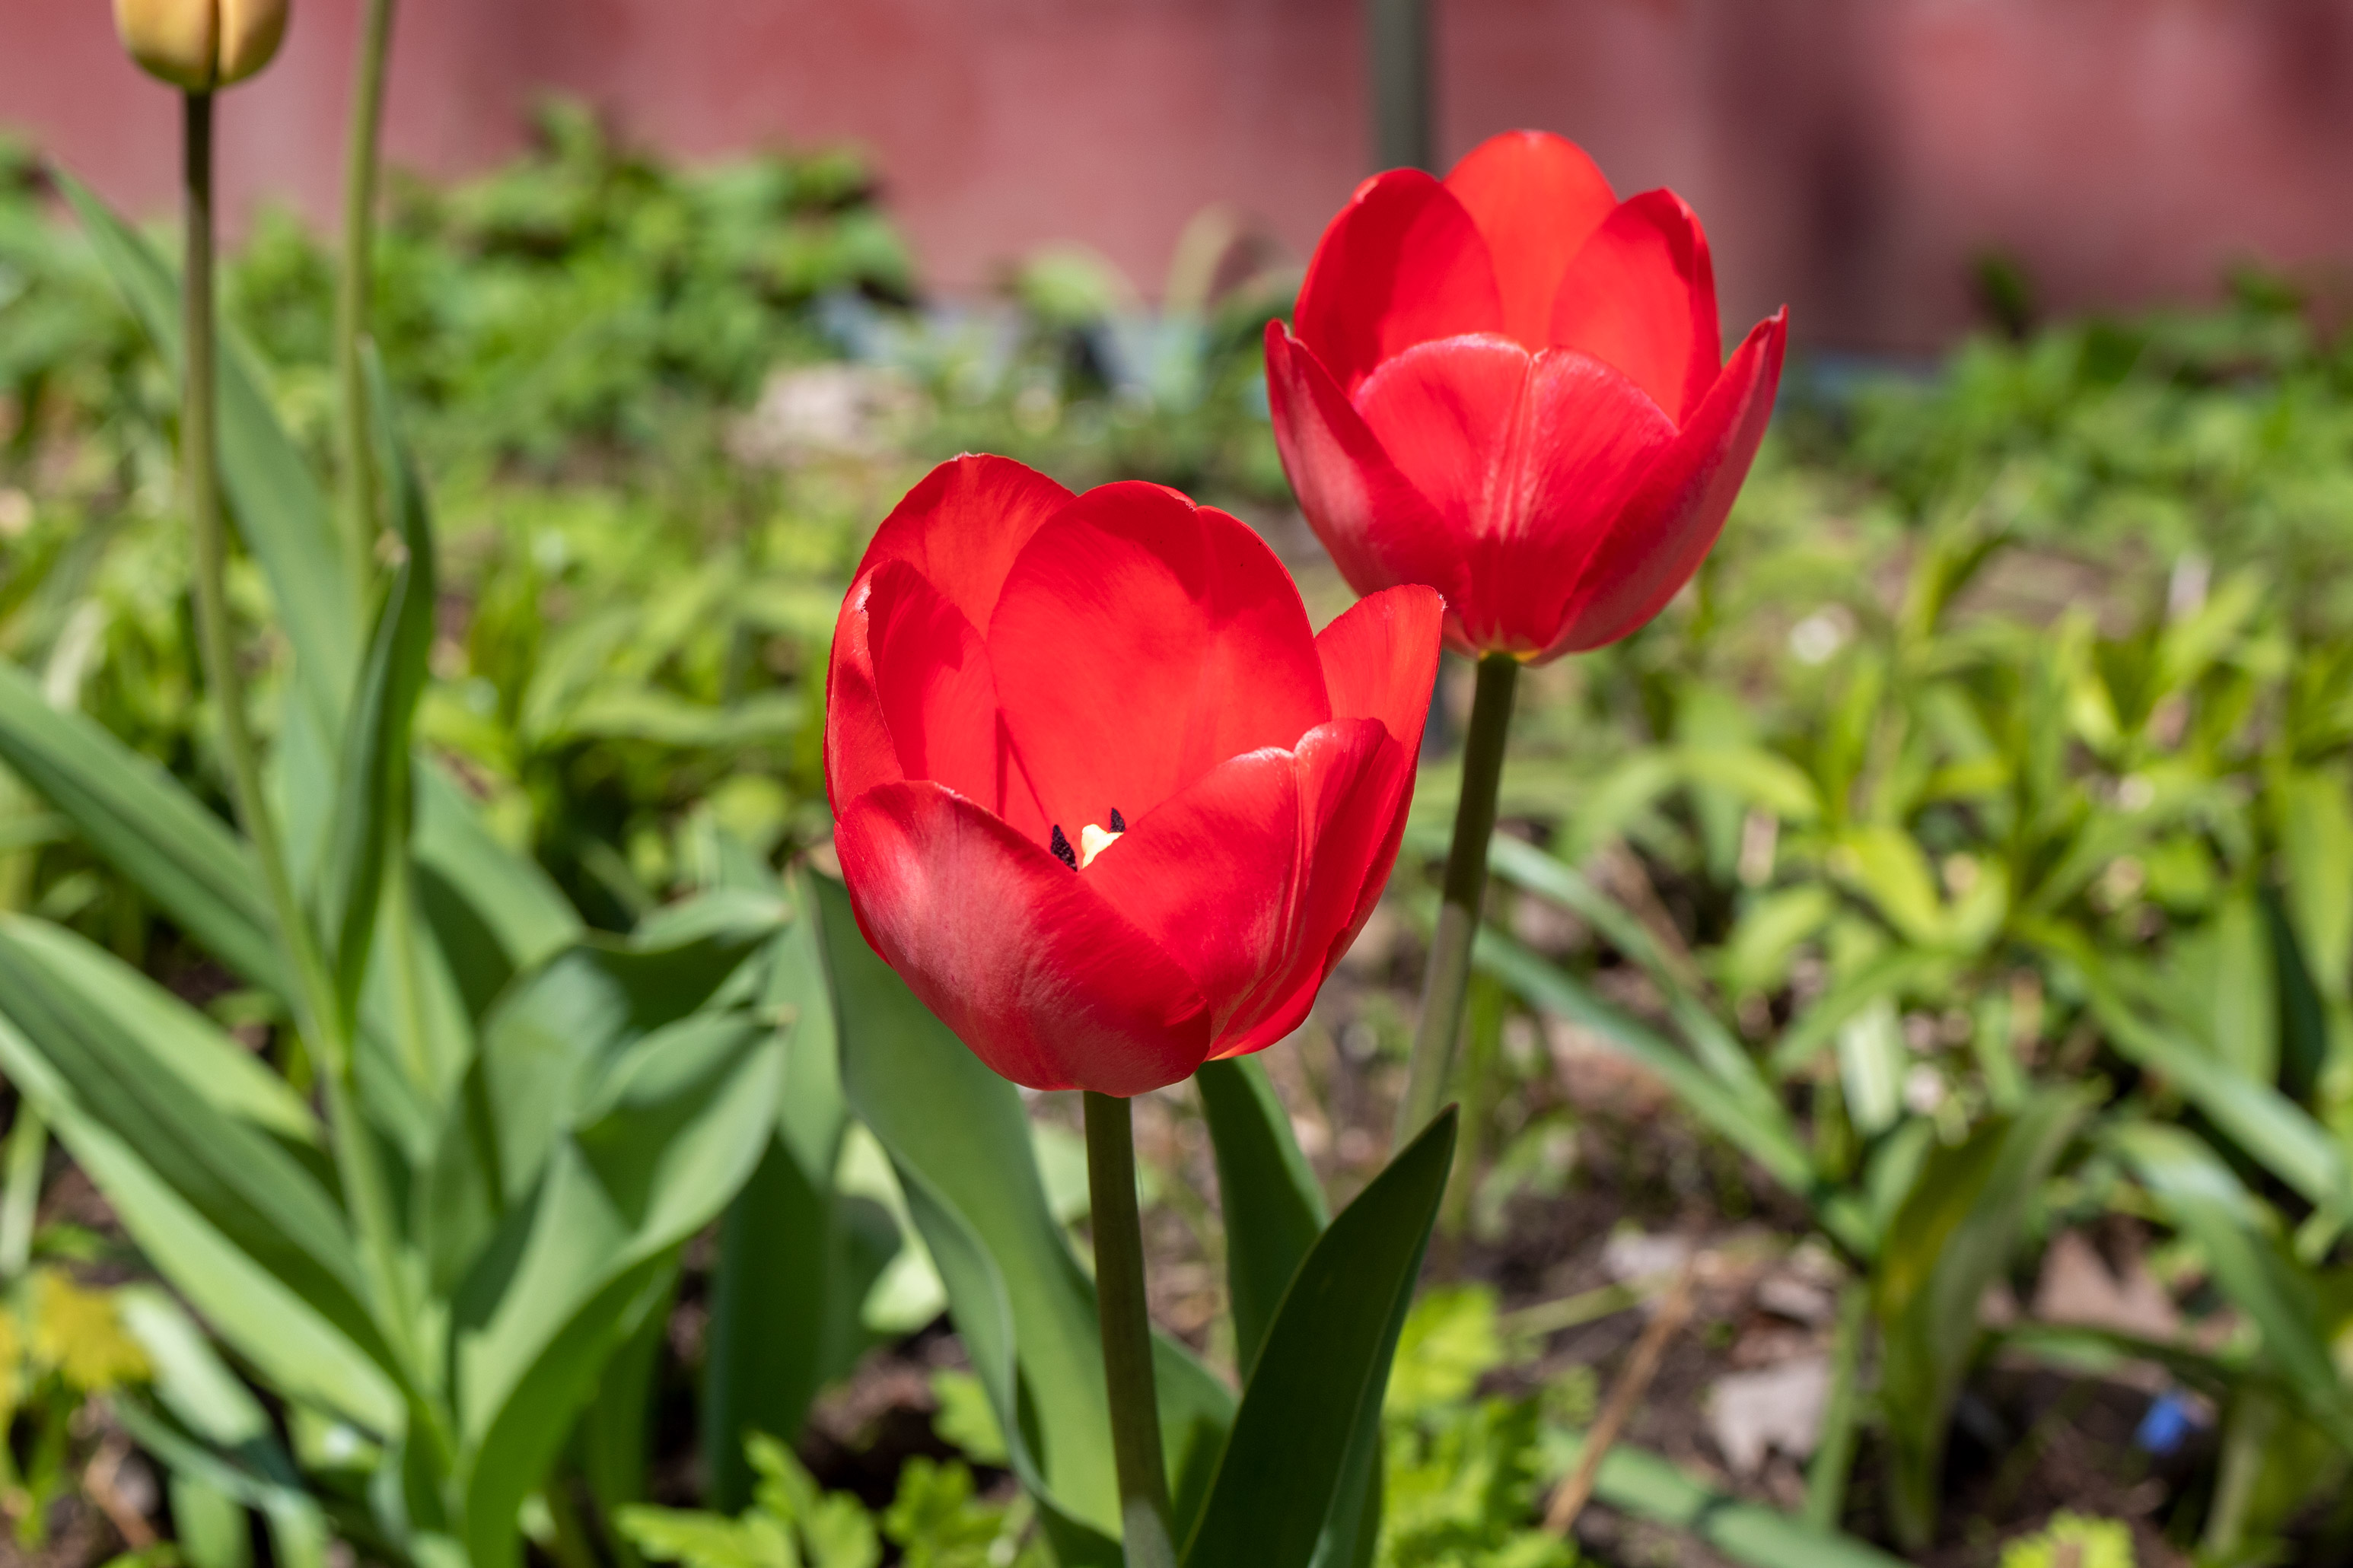 Two red tulips in full bloom, viewed from the side